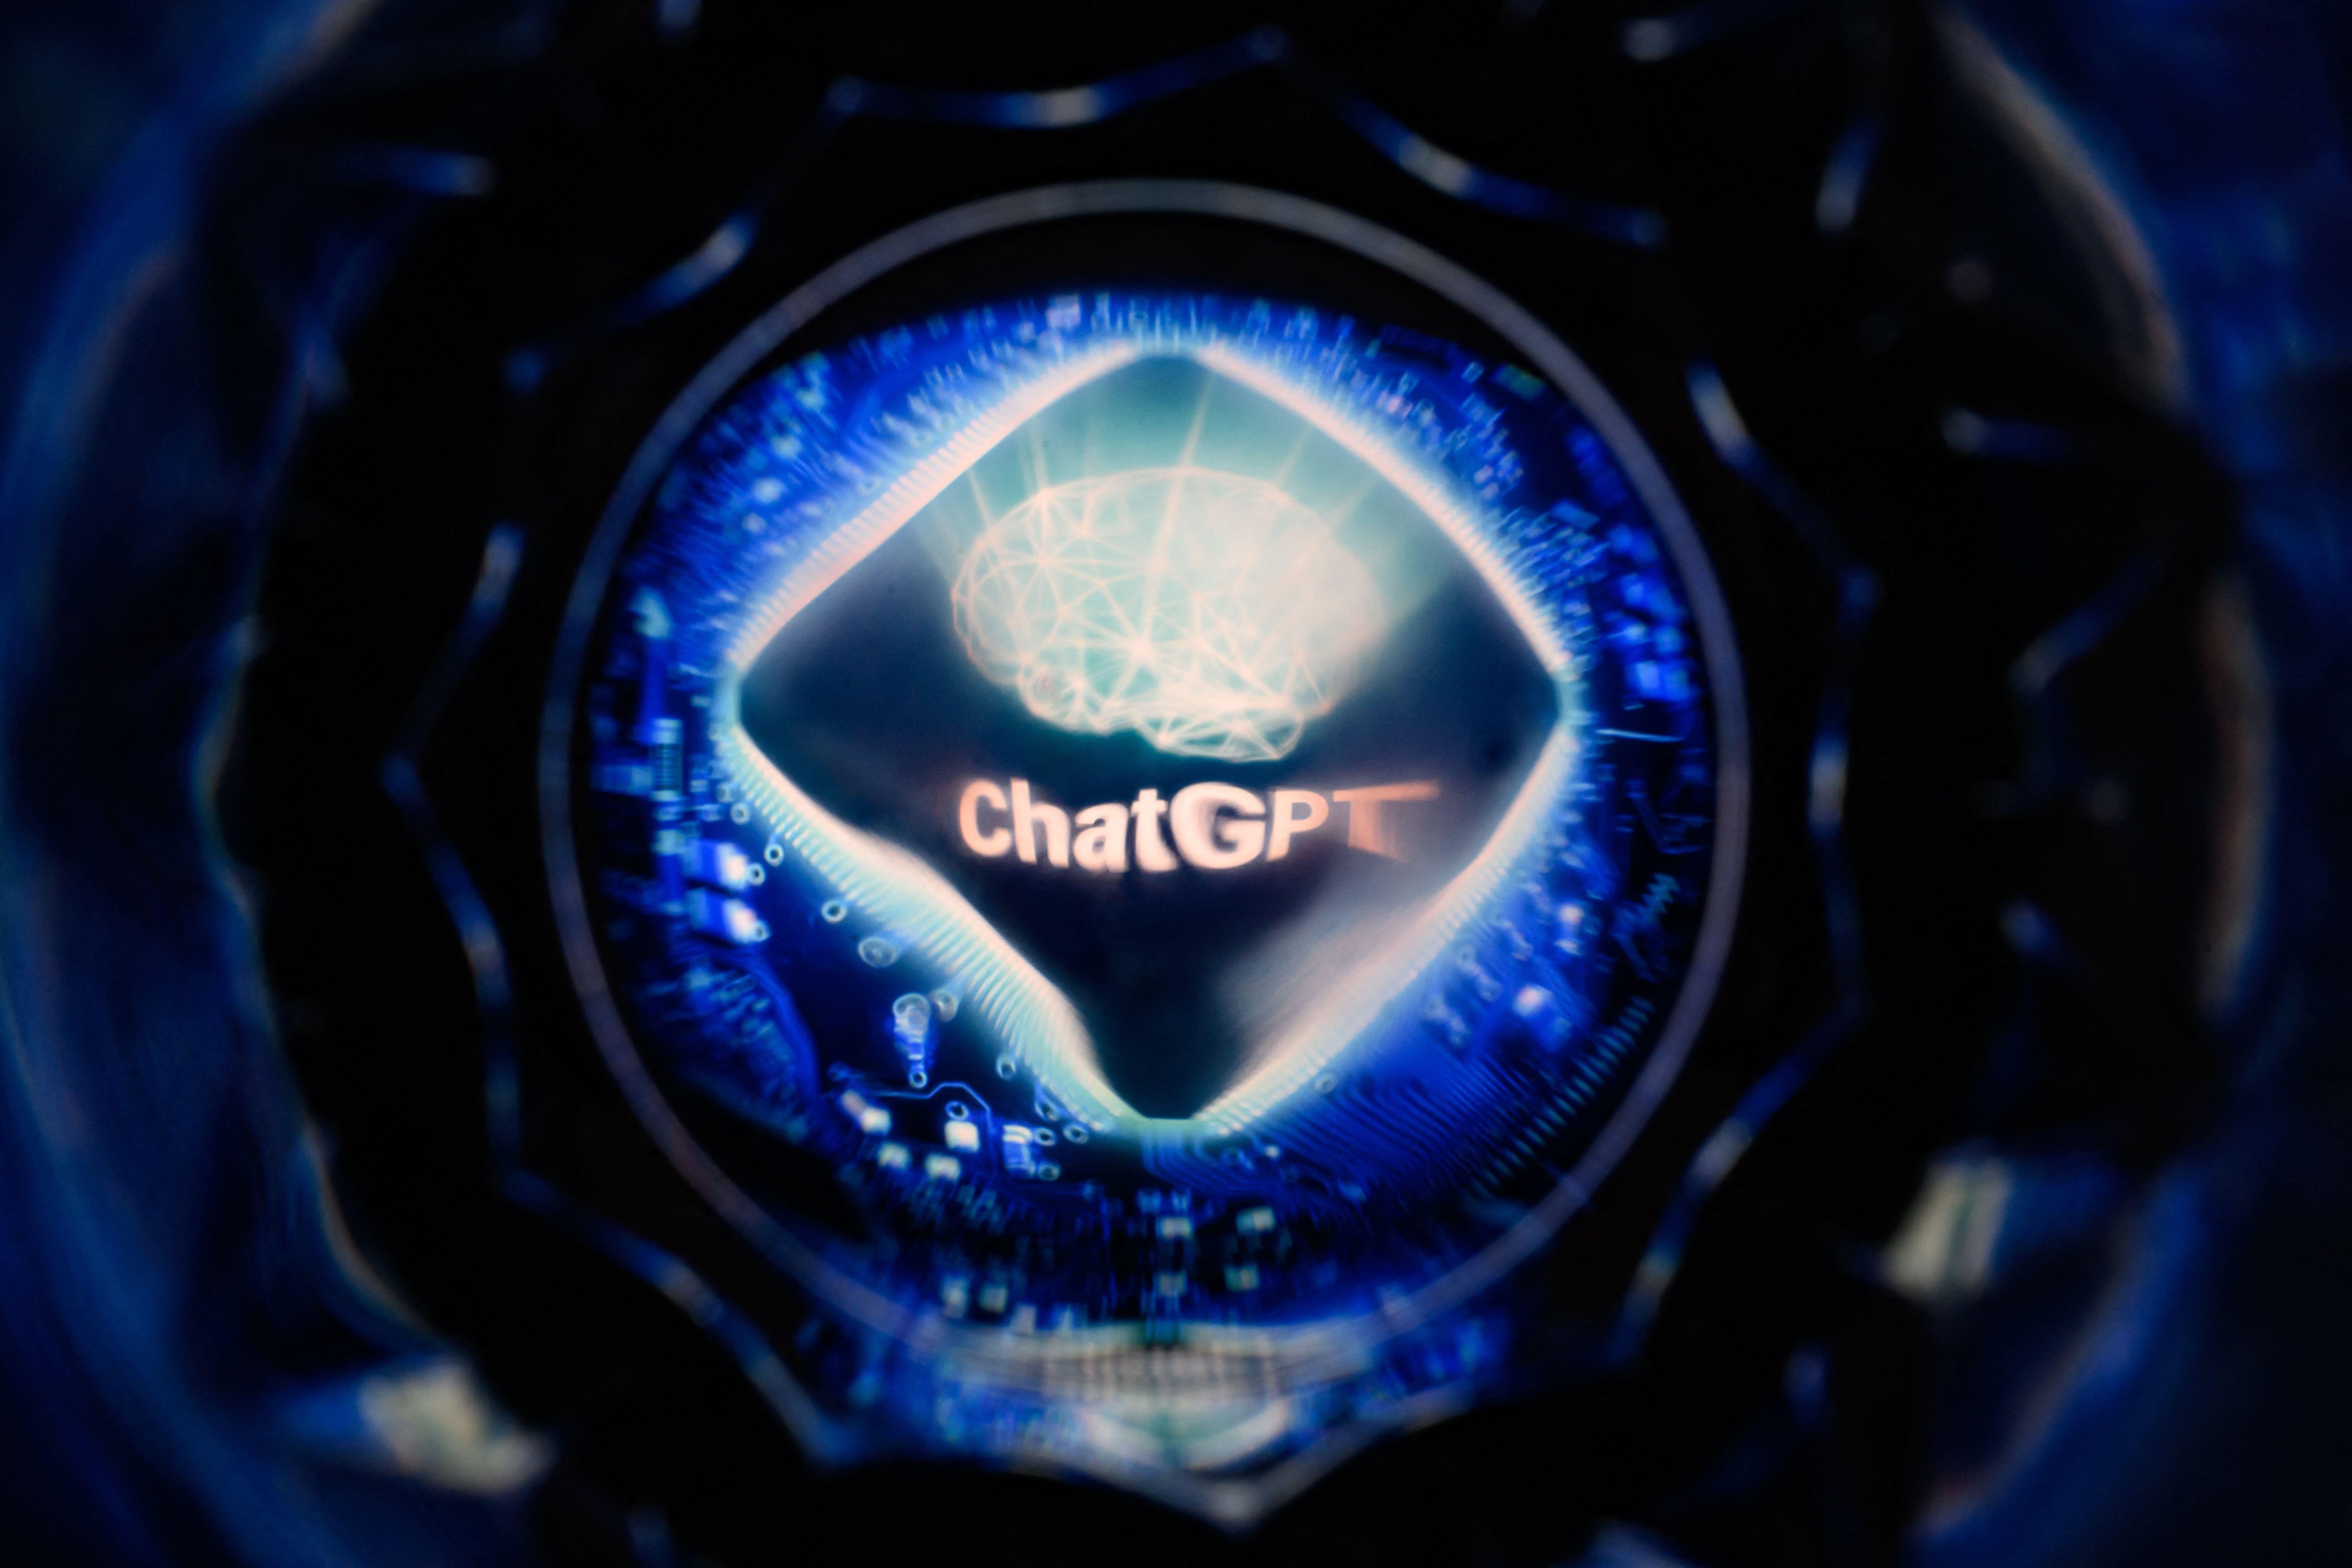 This picture taken on April 26, 2023 in Toulouse, southwestern France, shows a screen displaying the logo of ChatGPT, the conversational artificial intelligence software application developed by OpenAI. (Photo by Lionel BONAVENTURE / AFP) (Photo by LIONEL BONAVENTURE/AFP via Getty Images)